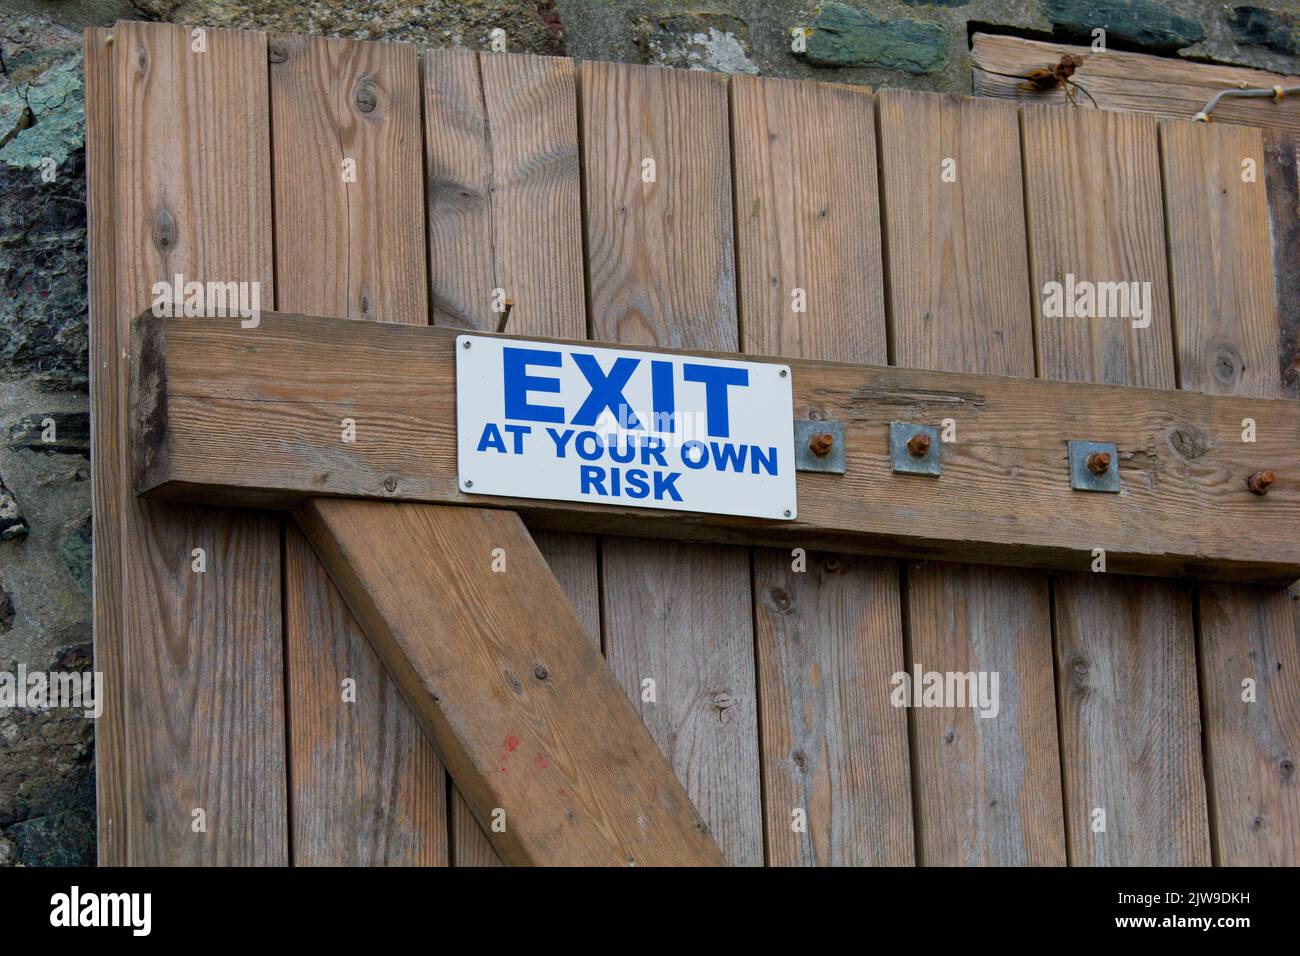 Exit sign warning of risk Stock Photo